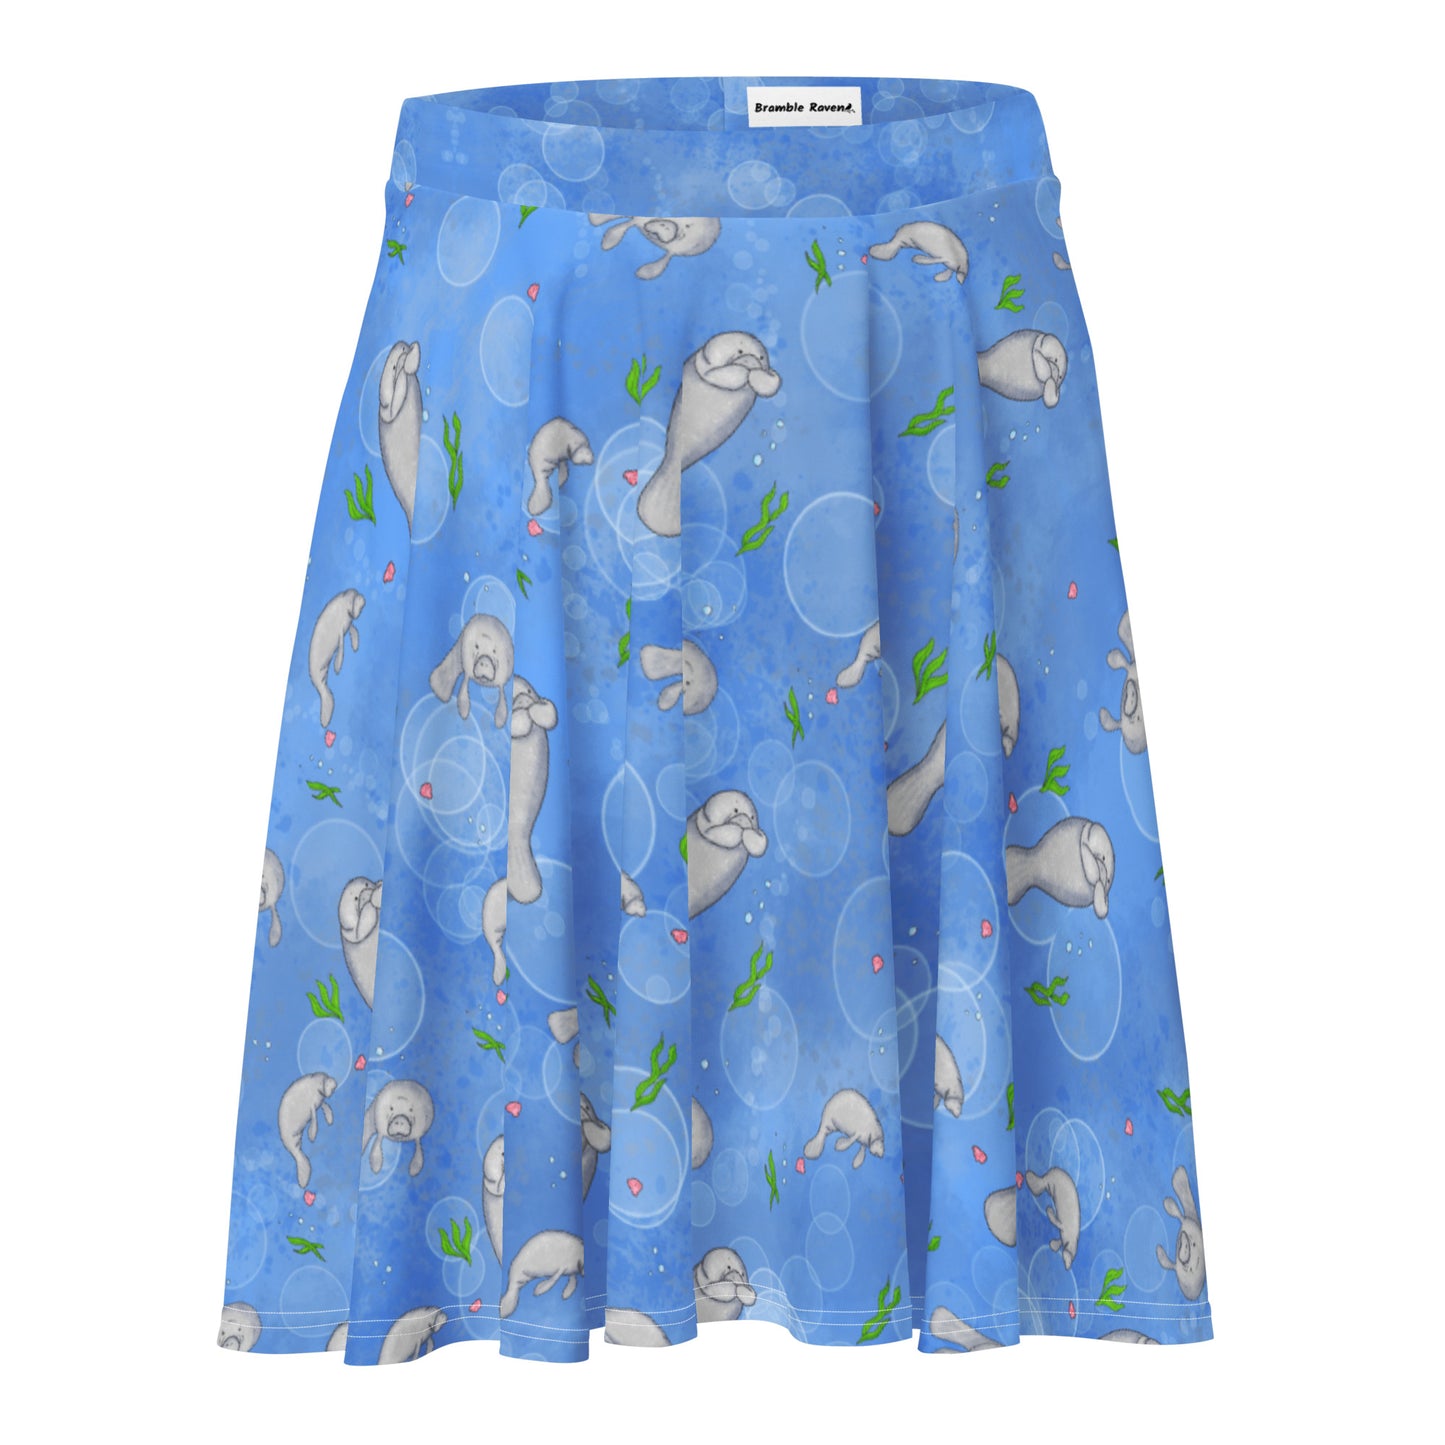 Manatee patterned skater skirt with elastic waist and mid-thigh length skirt. Has a pattern of manatees, seashells, seaweed and bubbles on a blue background.